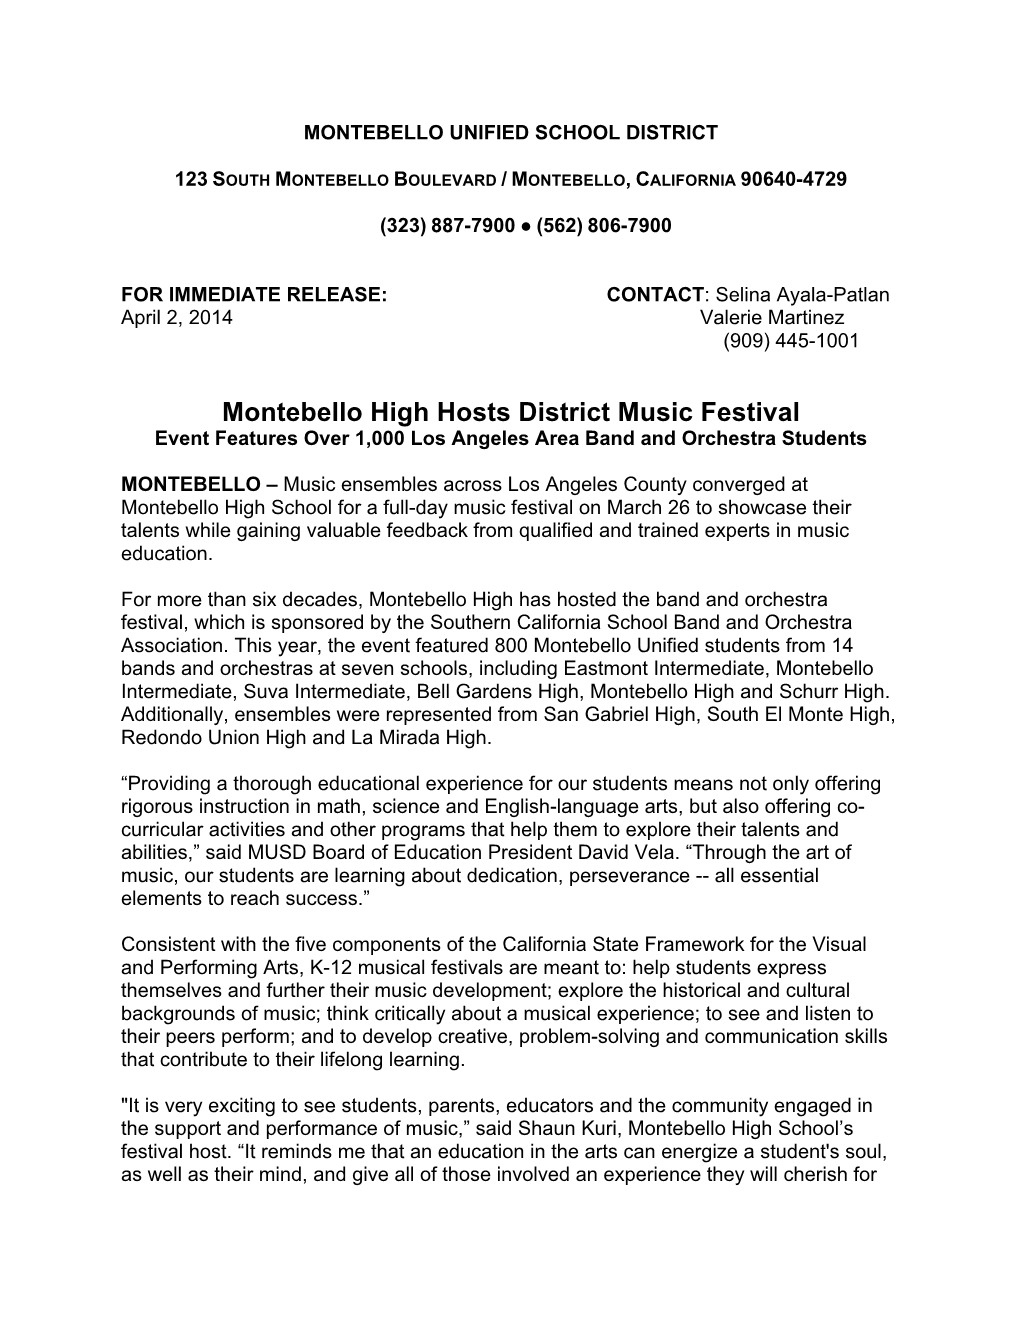 Montebello High Hosts District Music Festival Event Features Over 1,000 Los Angeles Area Band and Orchestra Students